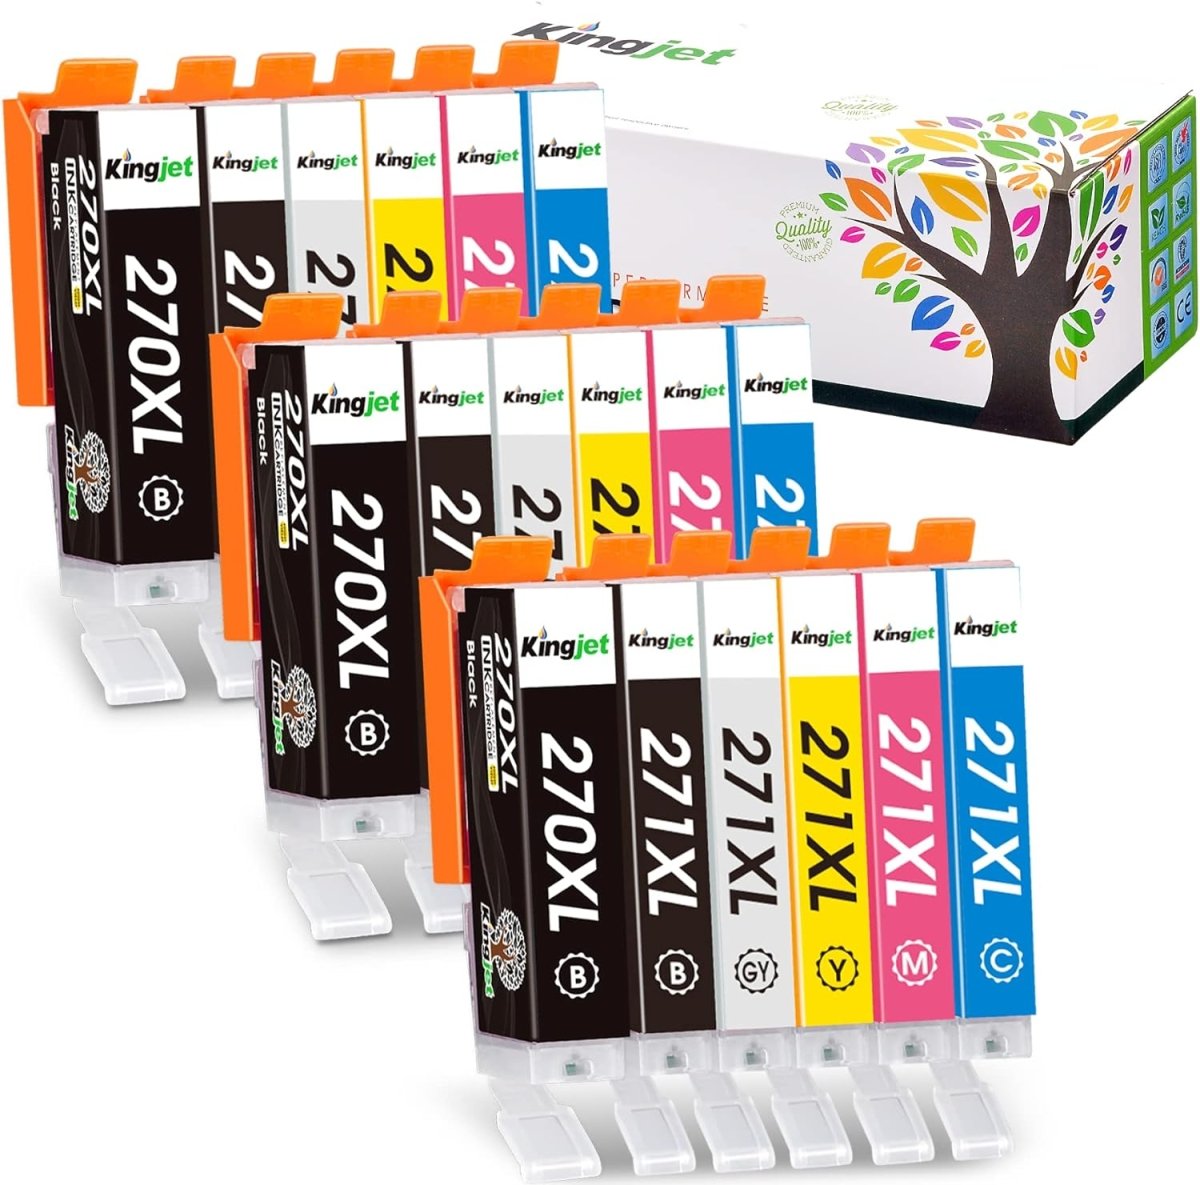 Compatible Canon 270 271 Ink Cartridges - 18 Pack with Gray - Linford Office:Printer Ink & Toner Cartridge